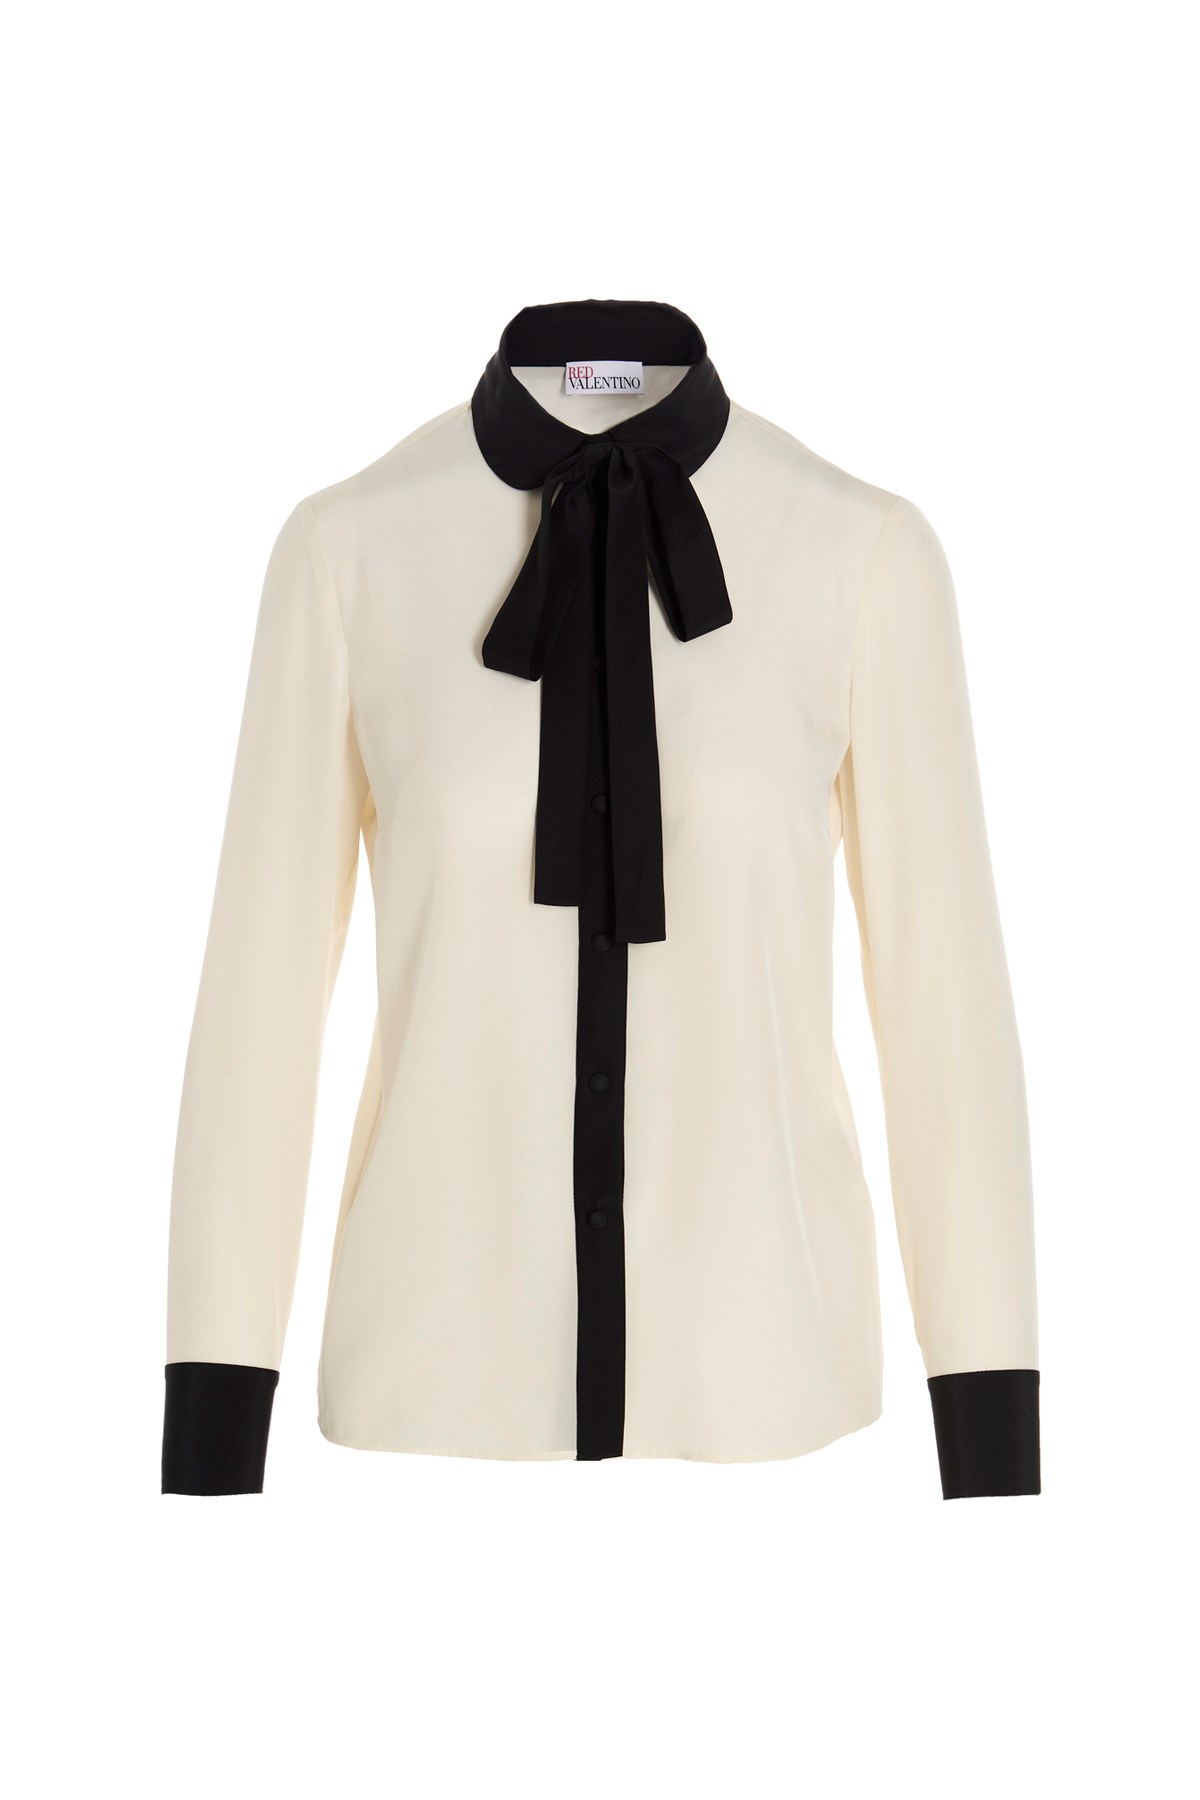 REDVALENTINO Pussy Bow Detail Blouse